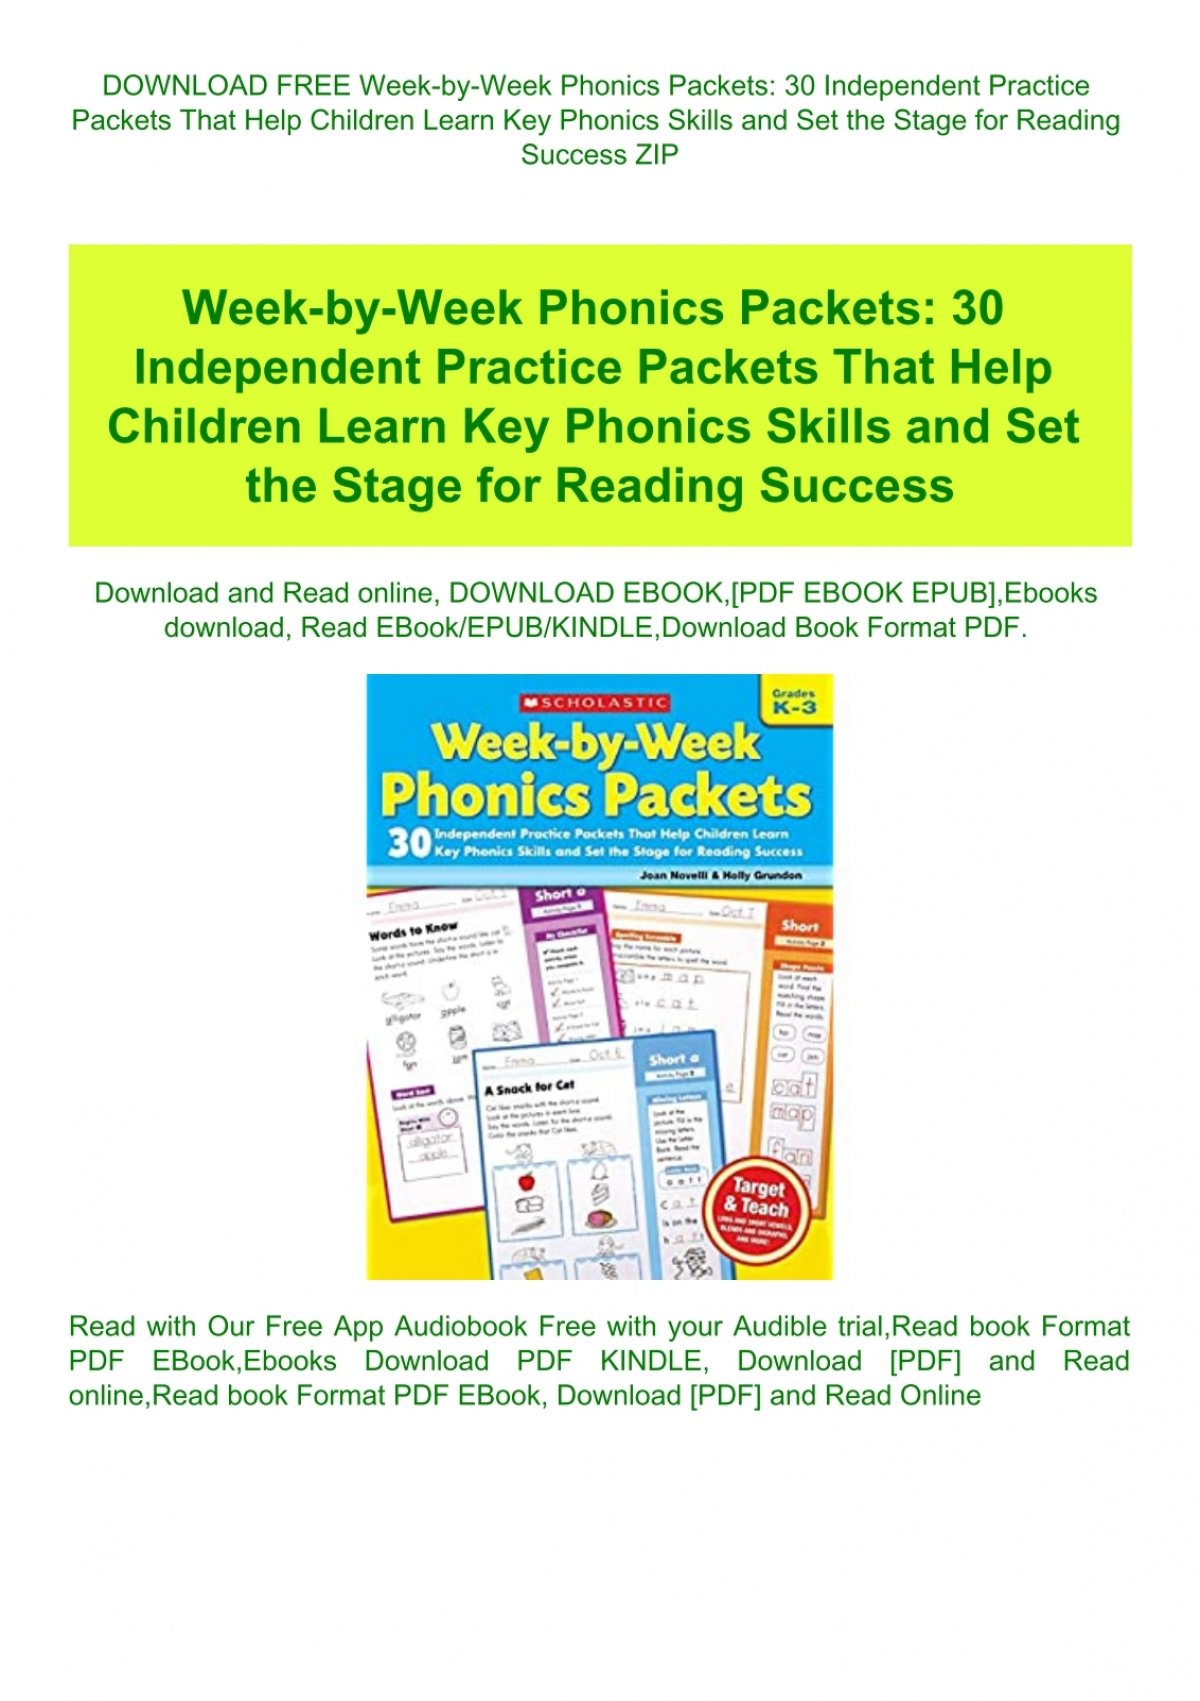 download-free-week-by-week-phonics-packets-30-independent-practice